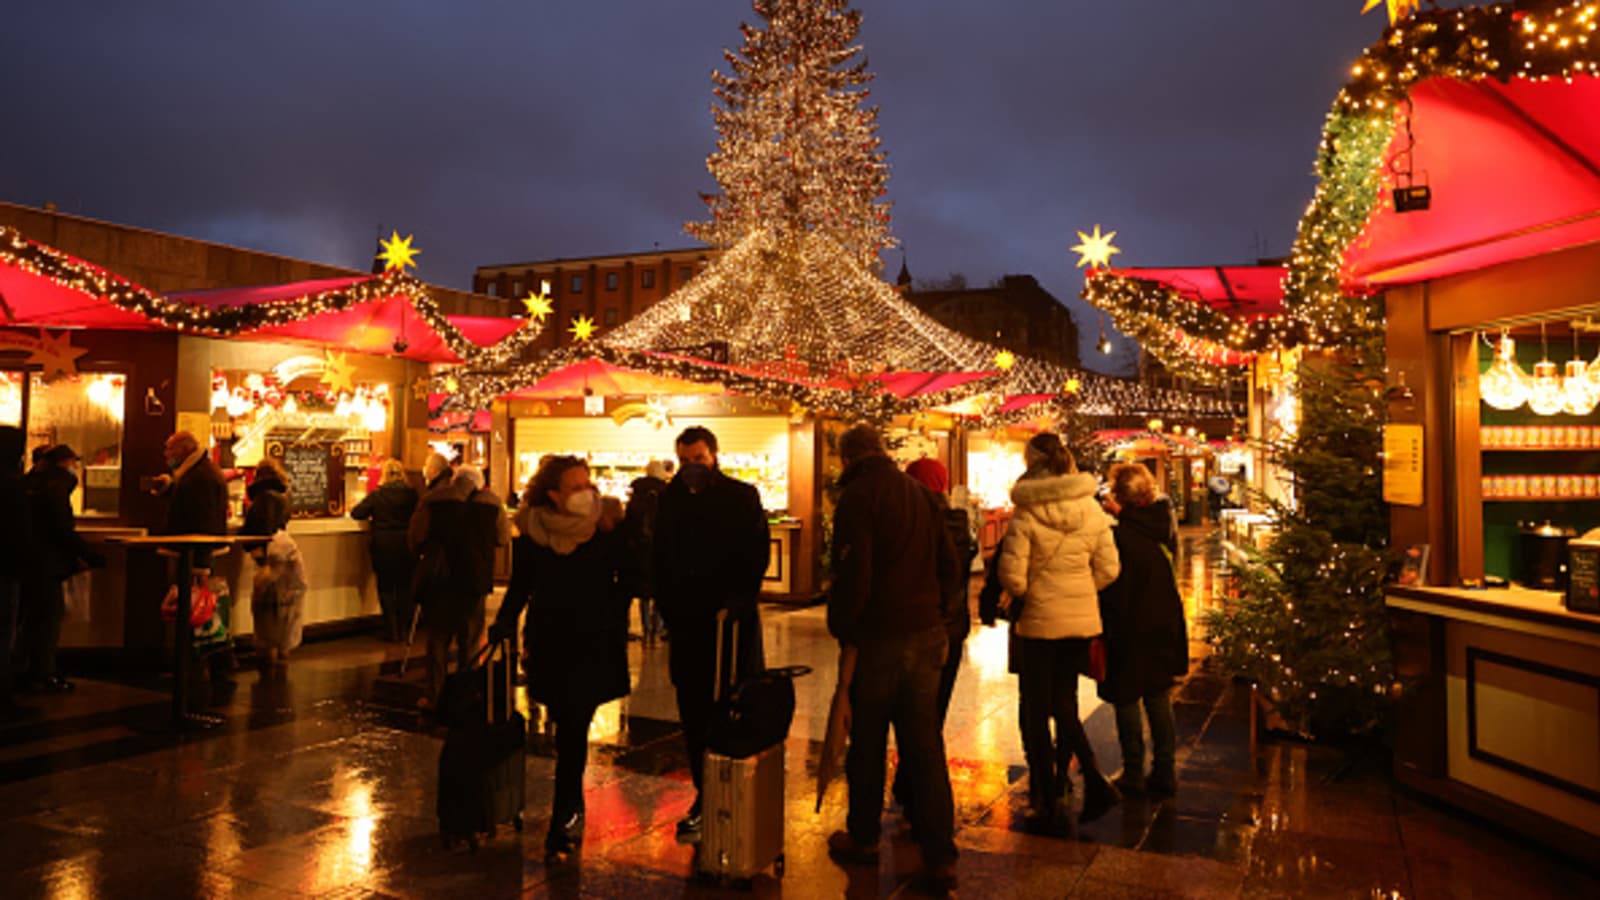 German Christmas Markets See Another Year Of Uncertainty And Closures